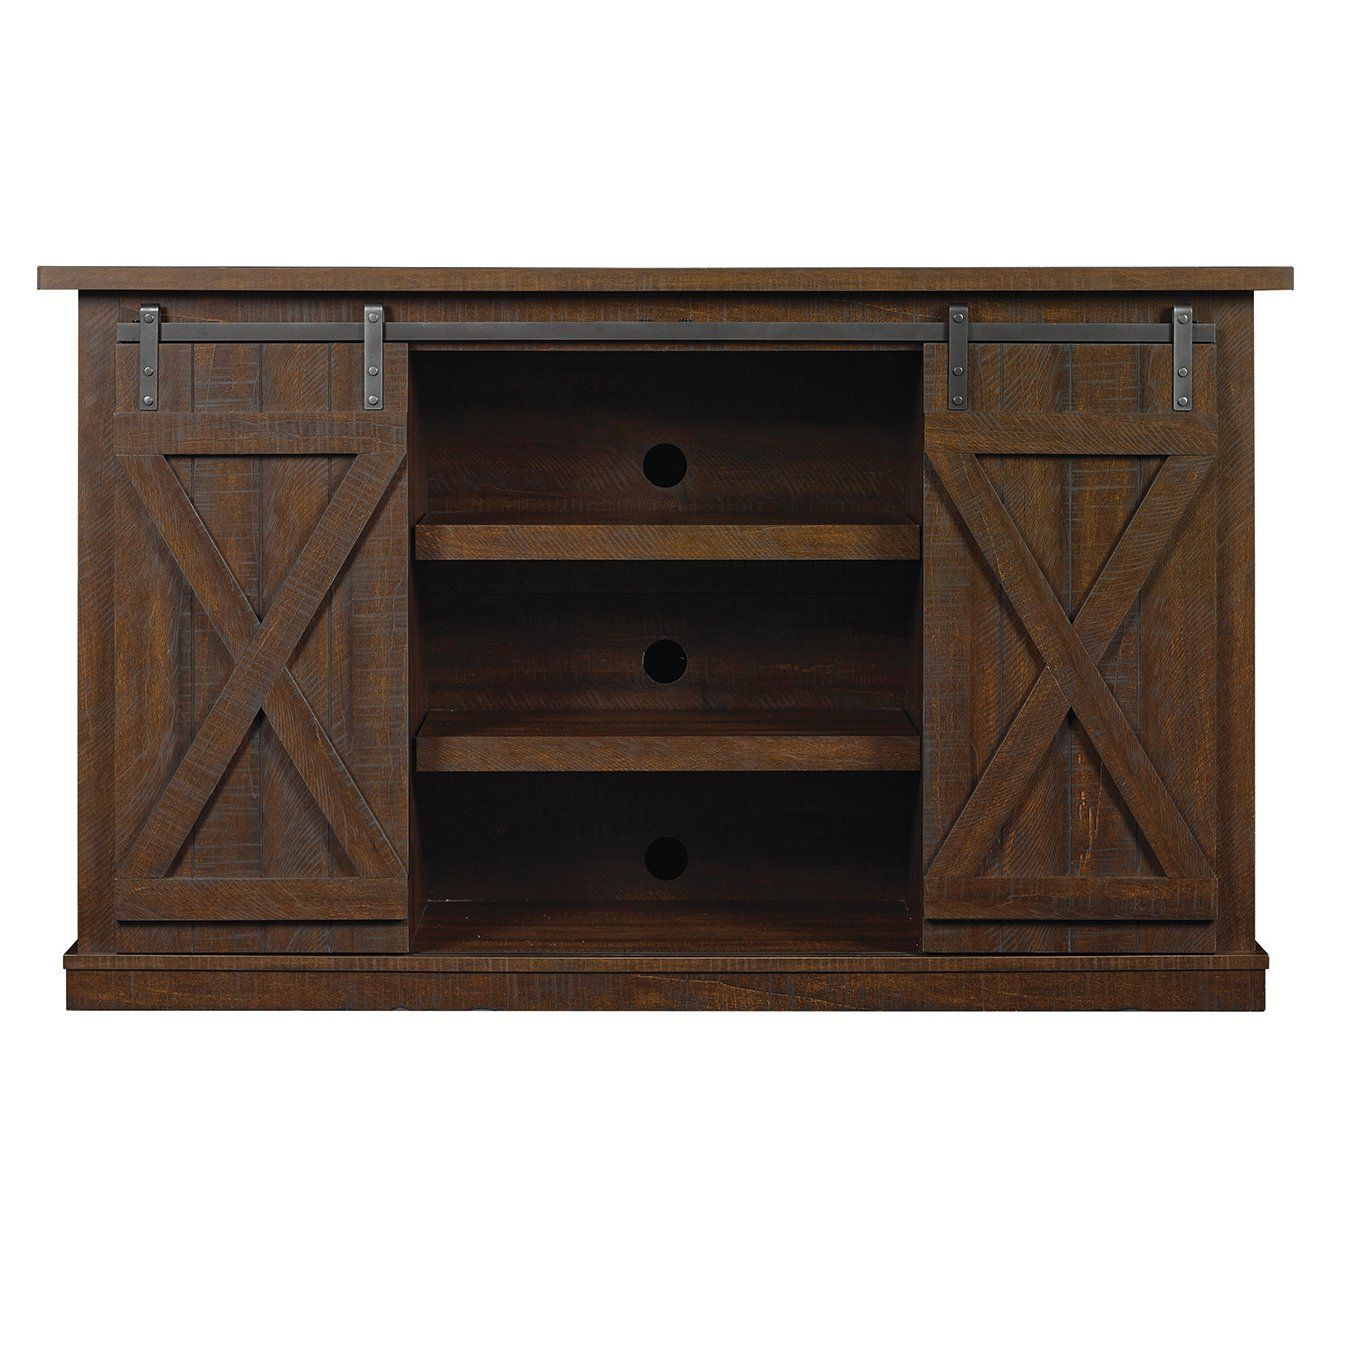 Modern & Contemporary Low Profile Tv Stand | Allmodern Throughout Symmetric Blue Swirl Credenzas (View 26 of 30)